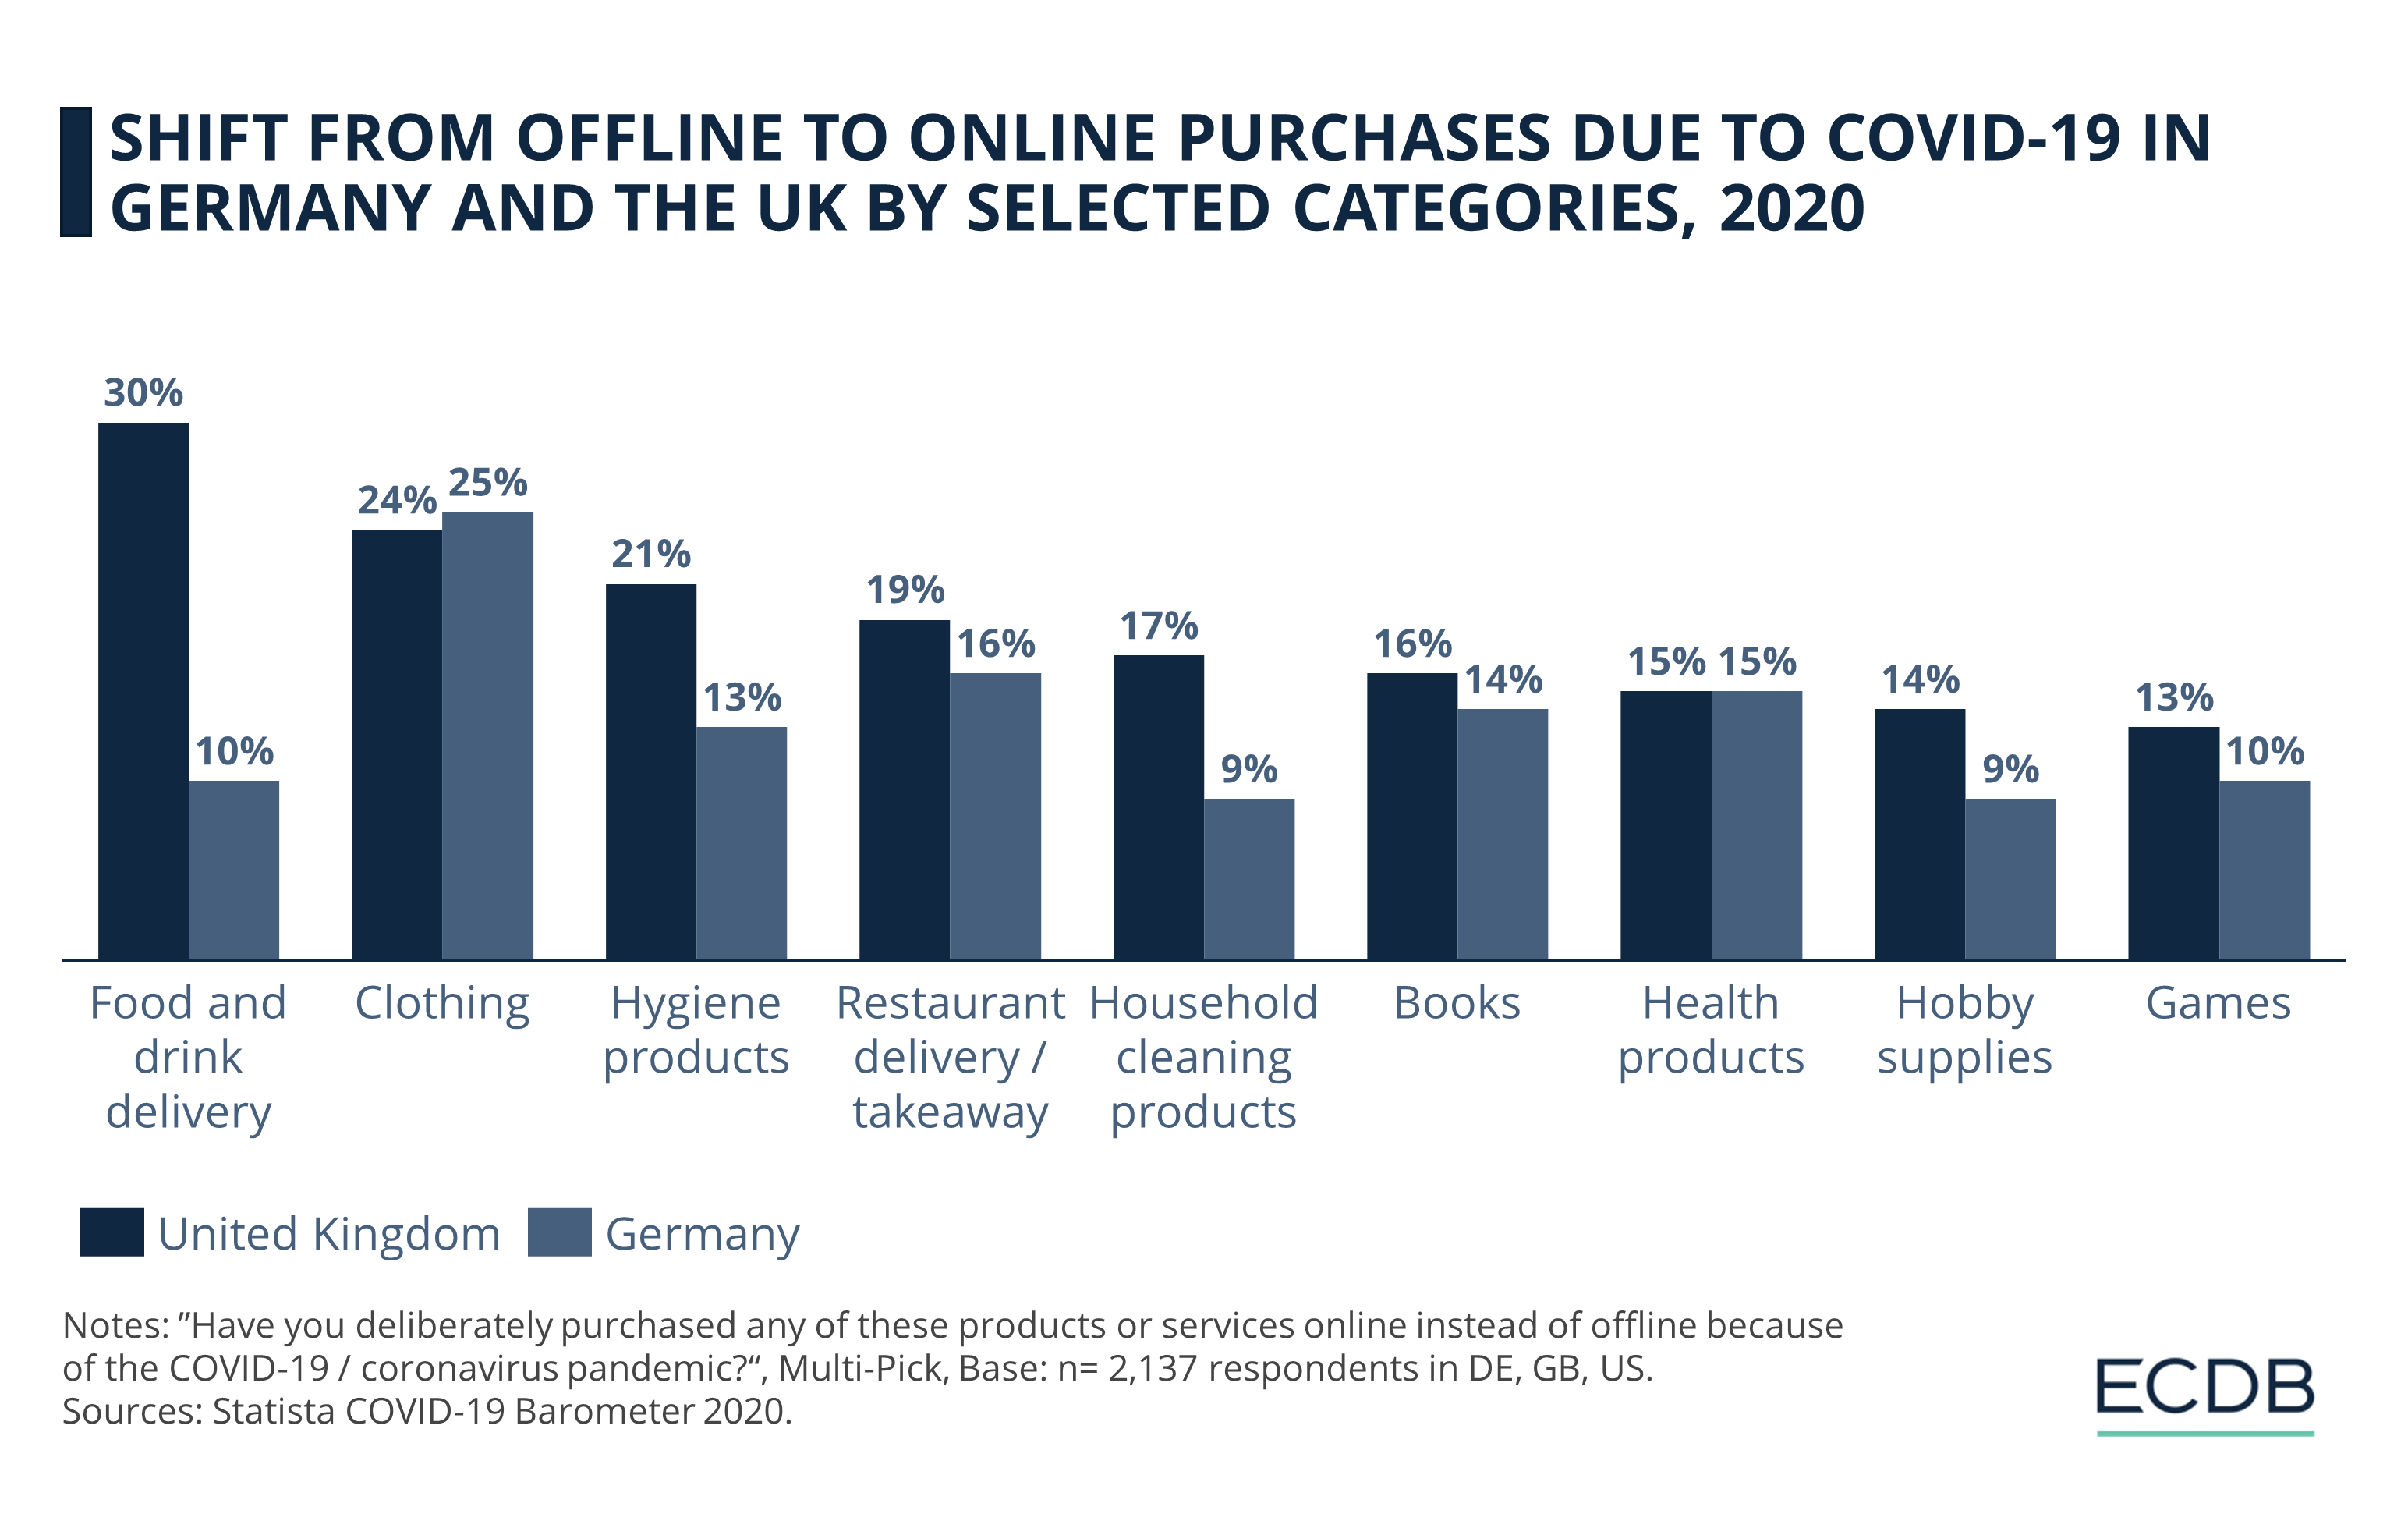 Shift From Offline to Online Purchases Due to COVID-19 in Germany and the UK by Selected Categories, 2020